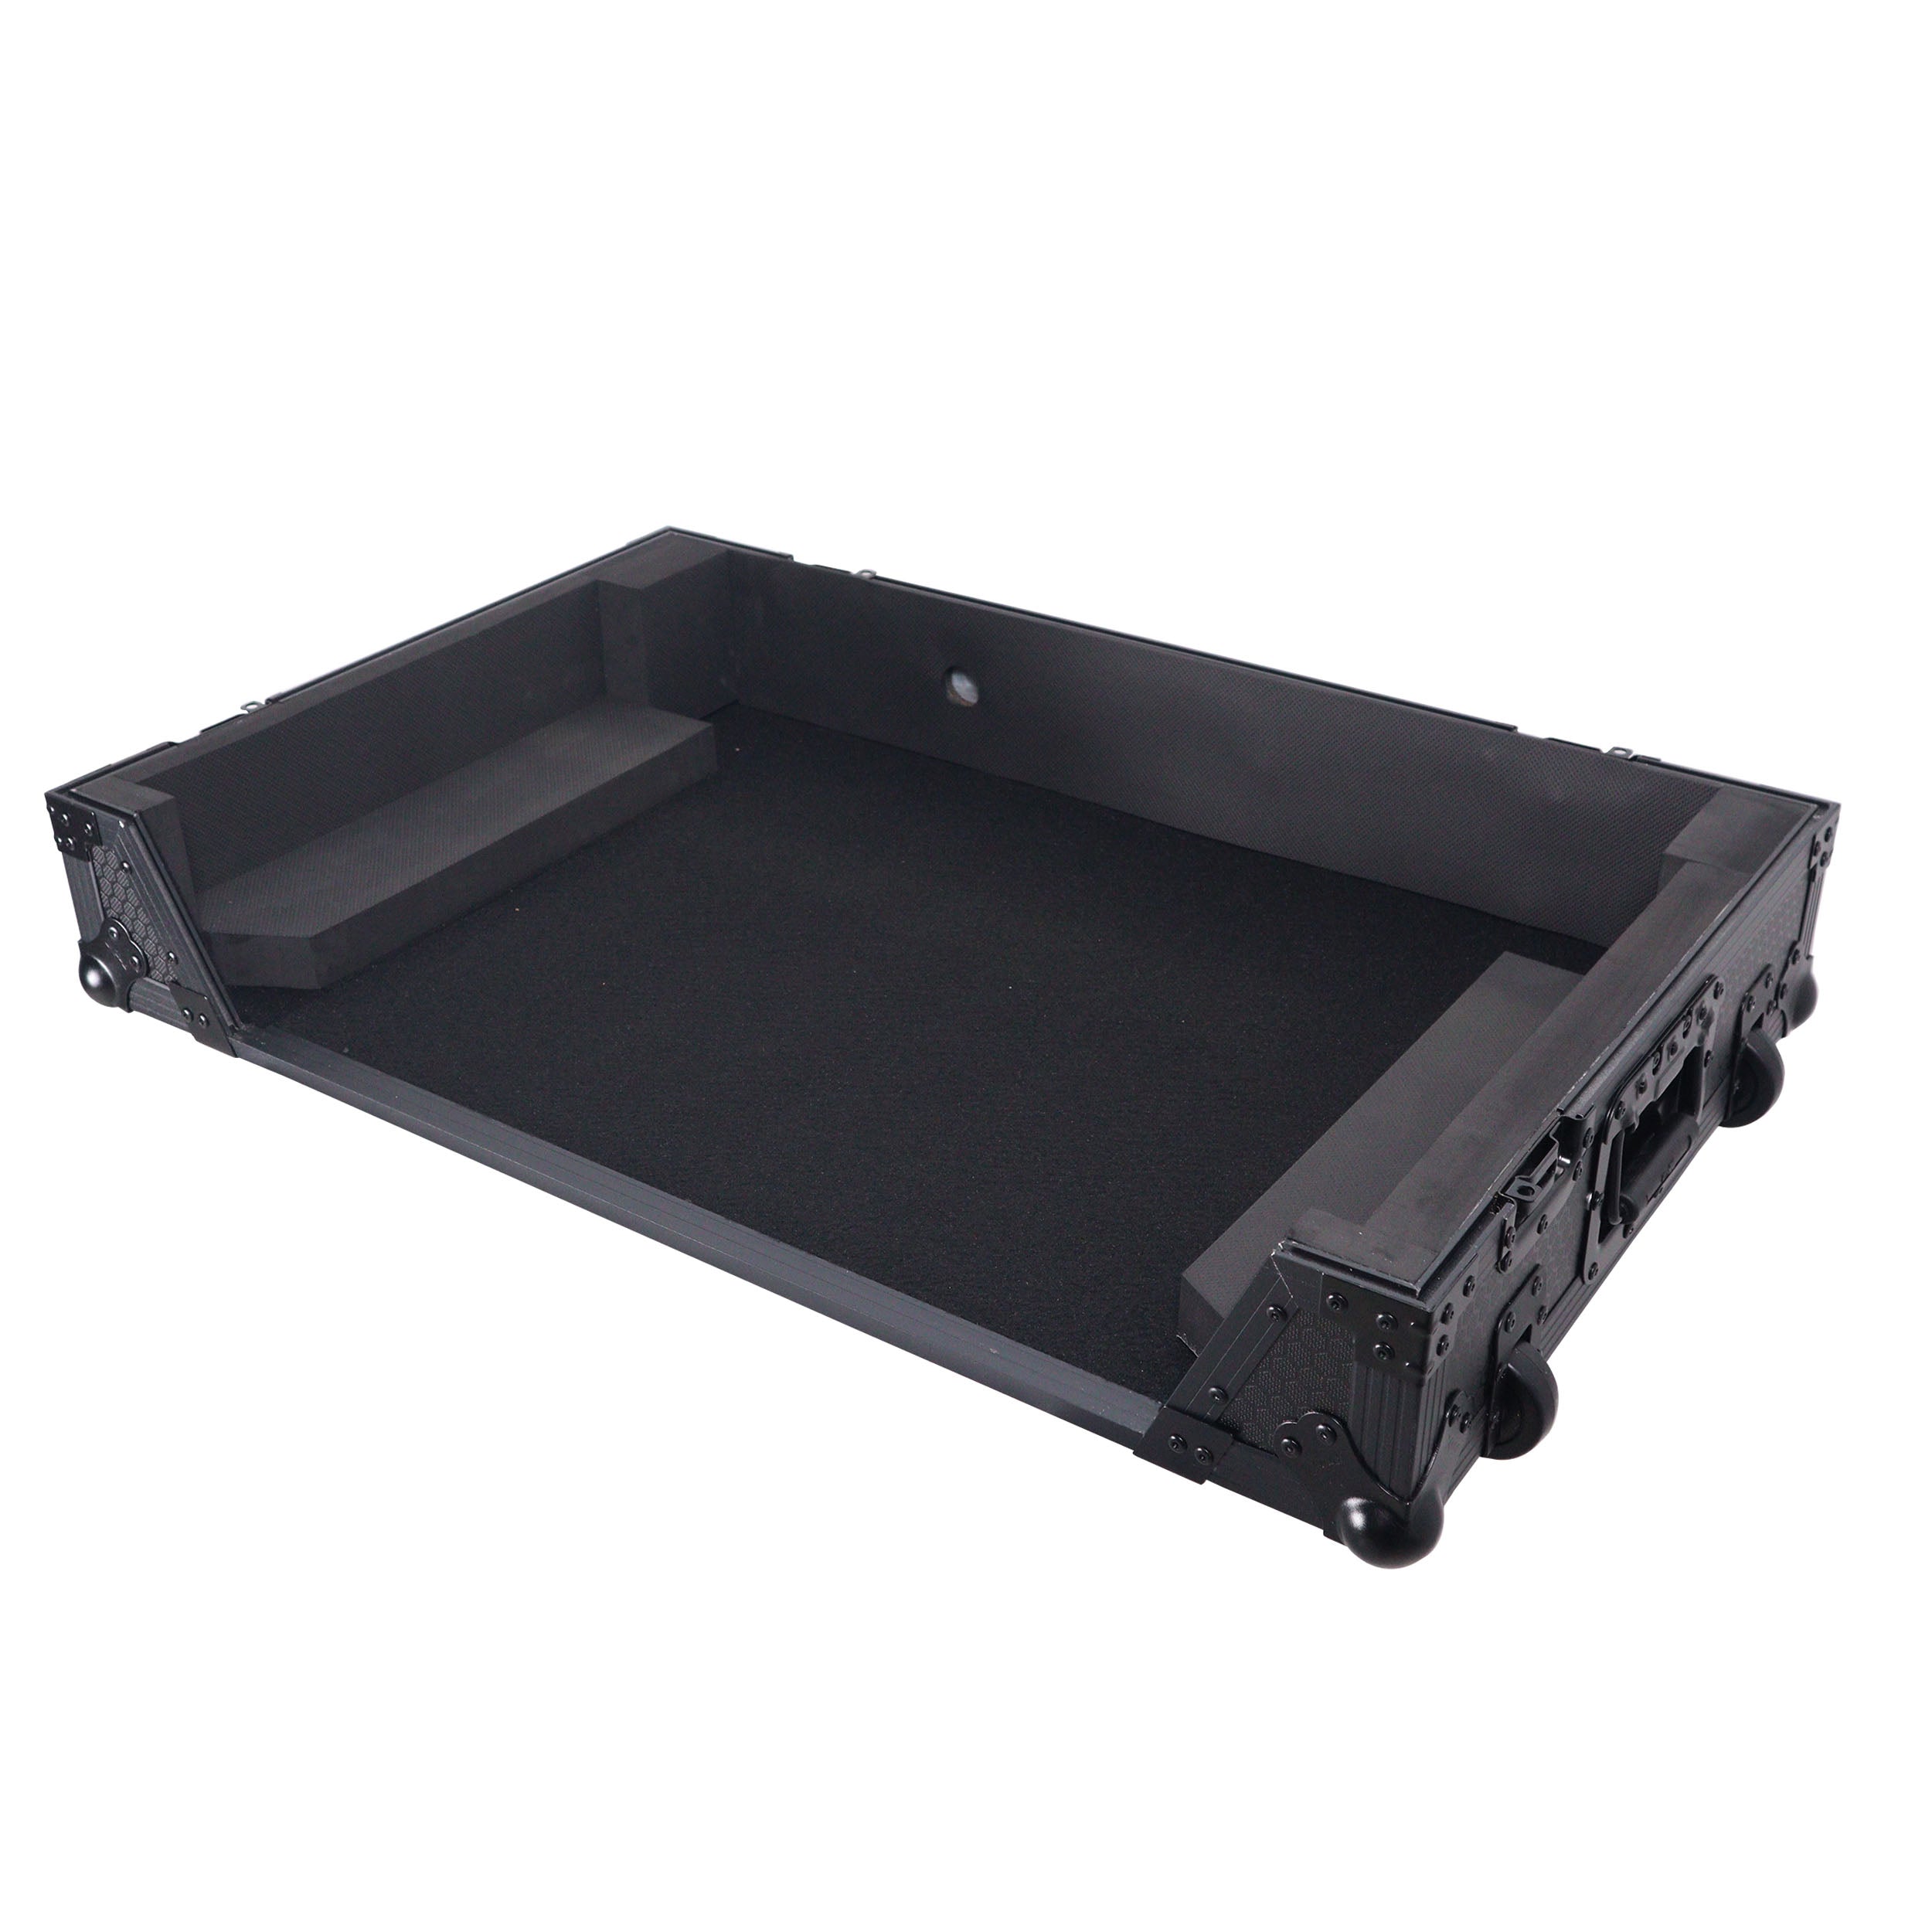 ProX XS-RANEFOURWBL, ATA Flight Style Road Case for RANE Four DJ Controller with 1U Rack Space and Wheels - Black Finish ProX Cases